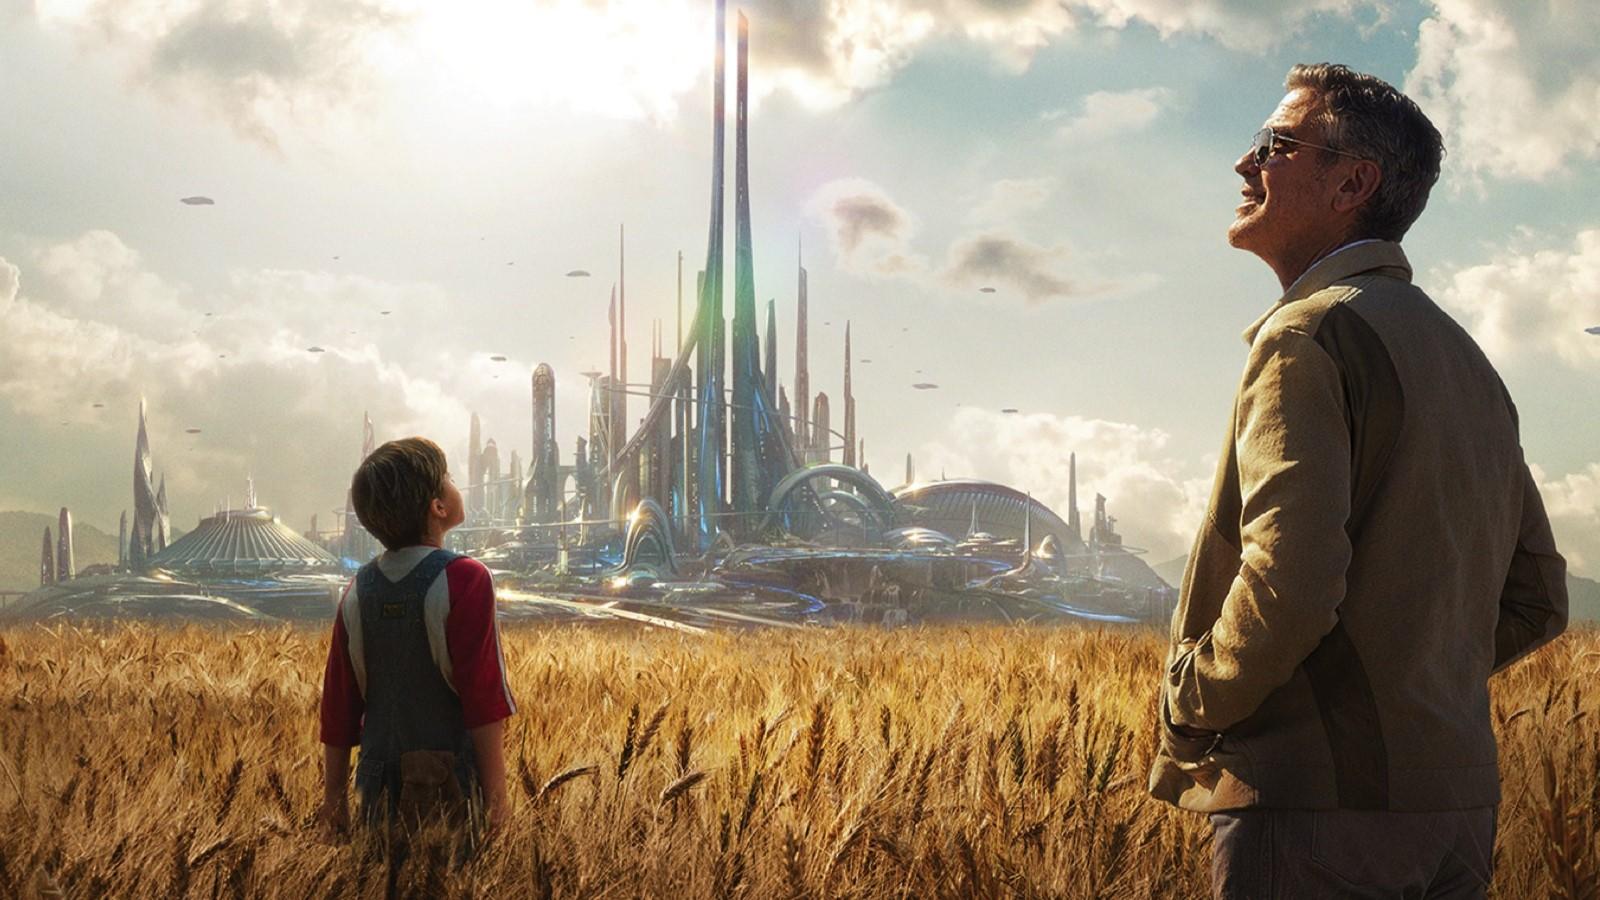 Space Mountain featured in the background of the Tomorrowland poster